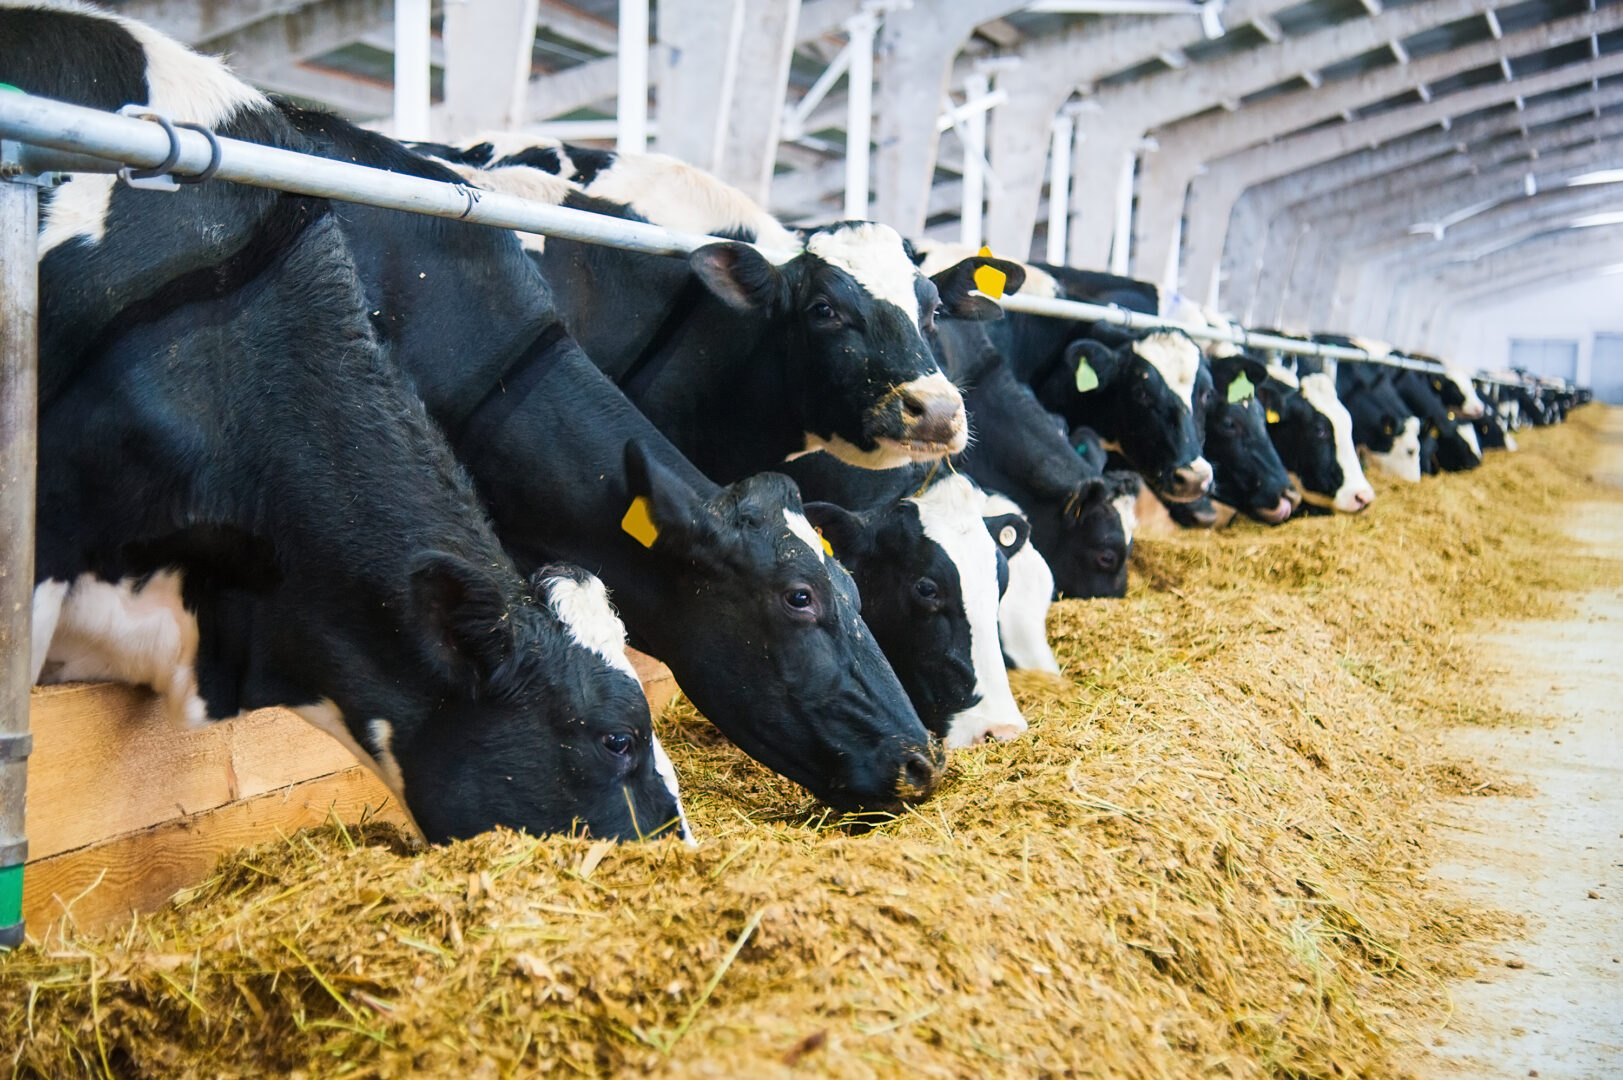 Scientists working to reduce cow burps and flatulence to fight climate change